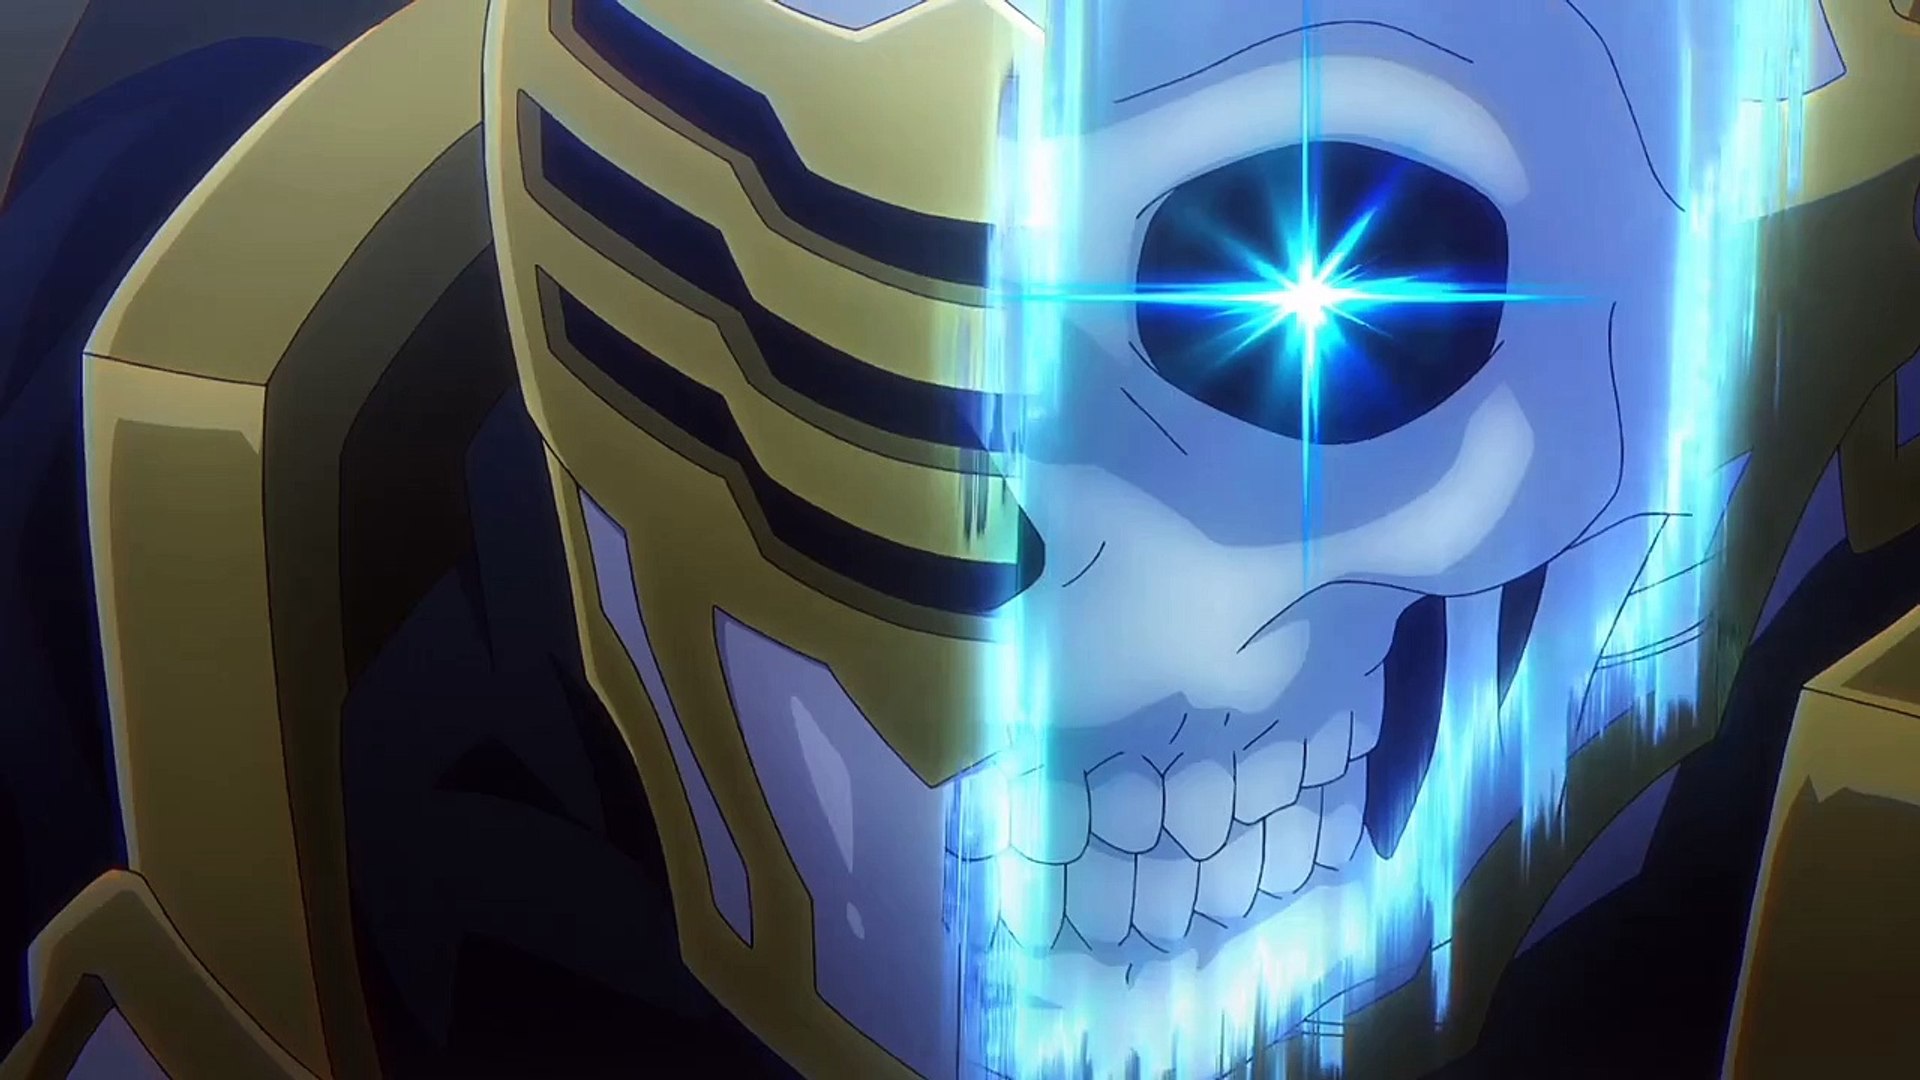 Skeleton Knight in Another World - EP 5 English Subbed - video